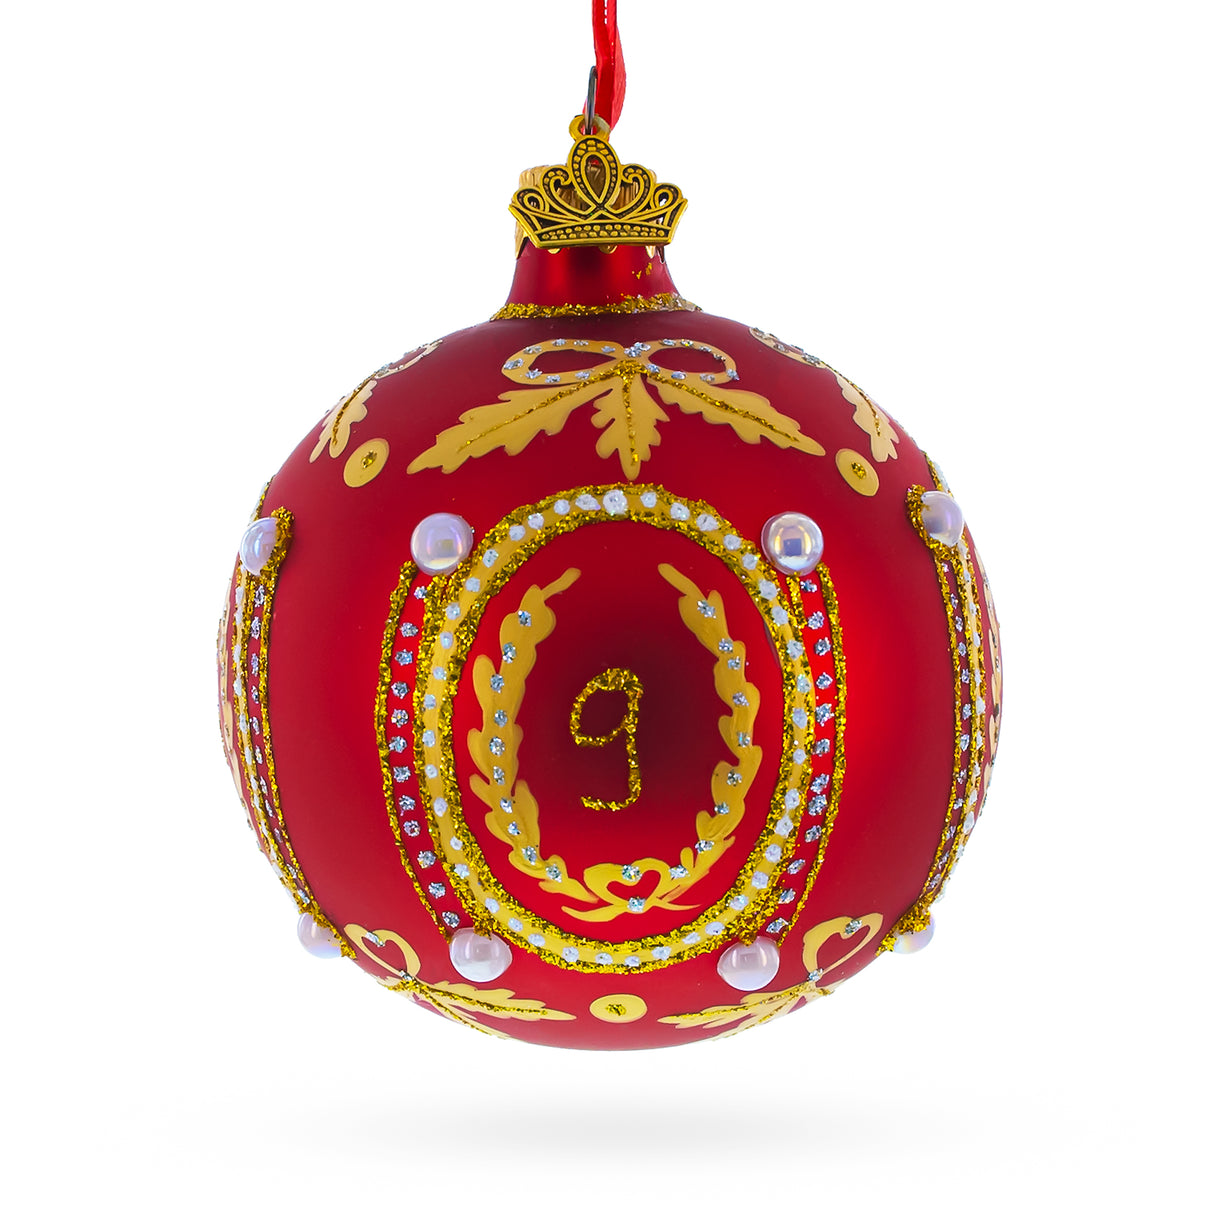 Glass Elegant 1893 Caucasus Royal Egg Red - Blown Glass Ball Christmas Ornament 3.25 Inches in Red color Round